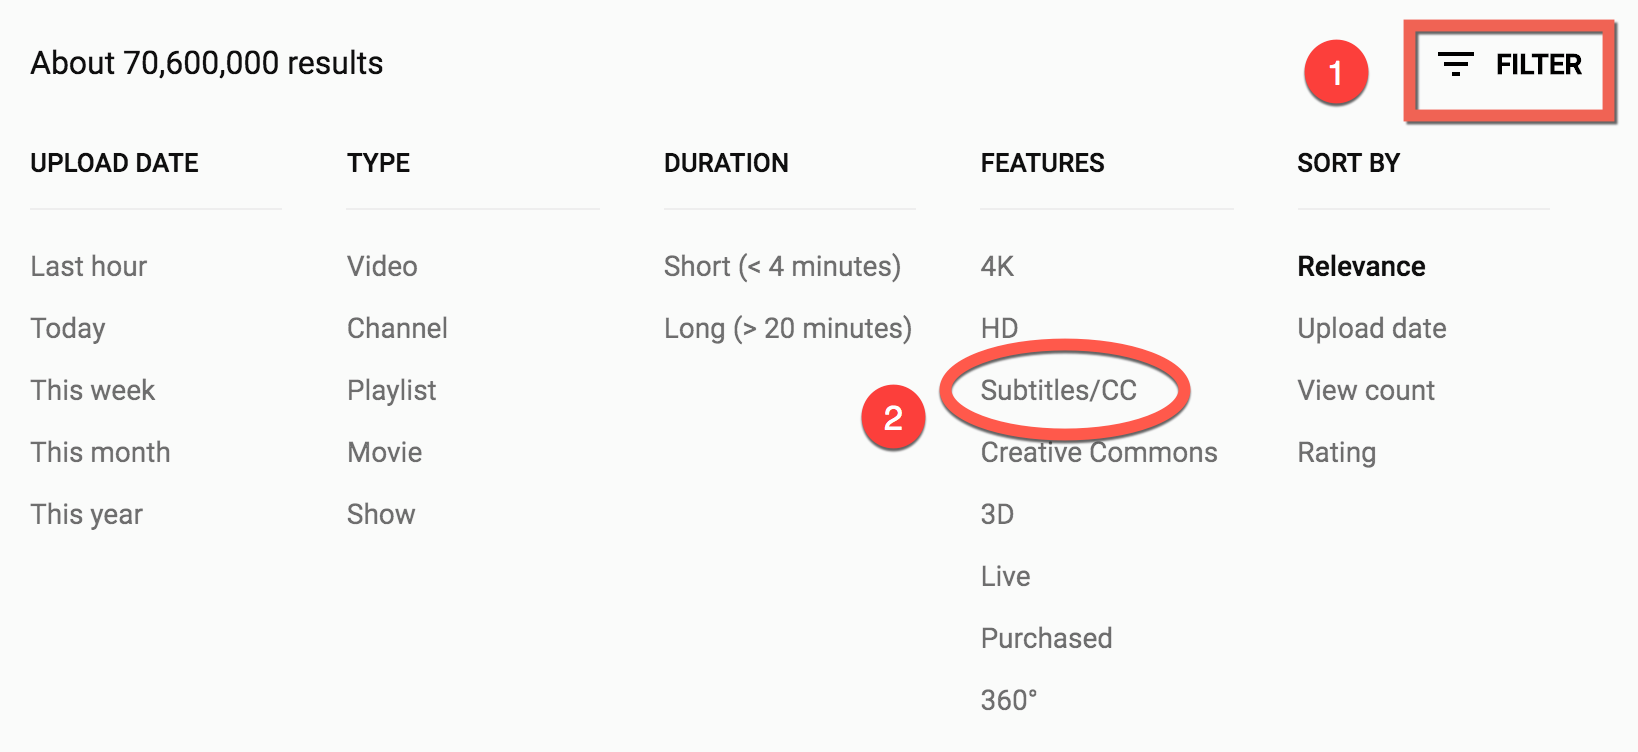 Screenshot showing the filter option and selecting Subtitles/CC from the list